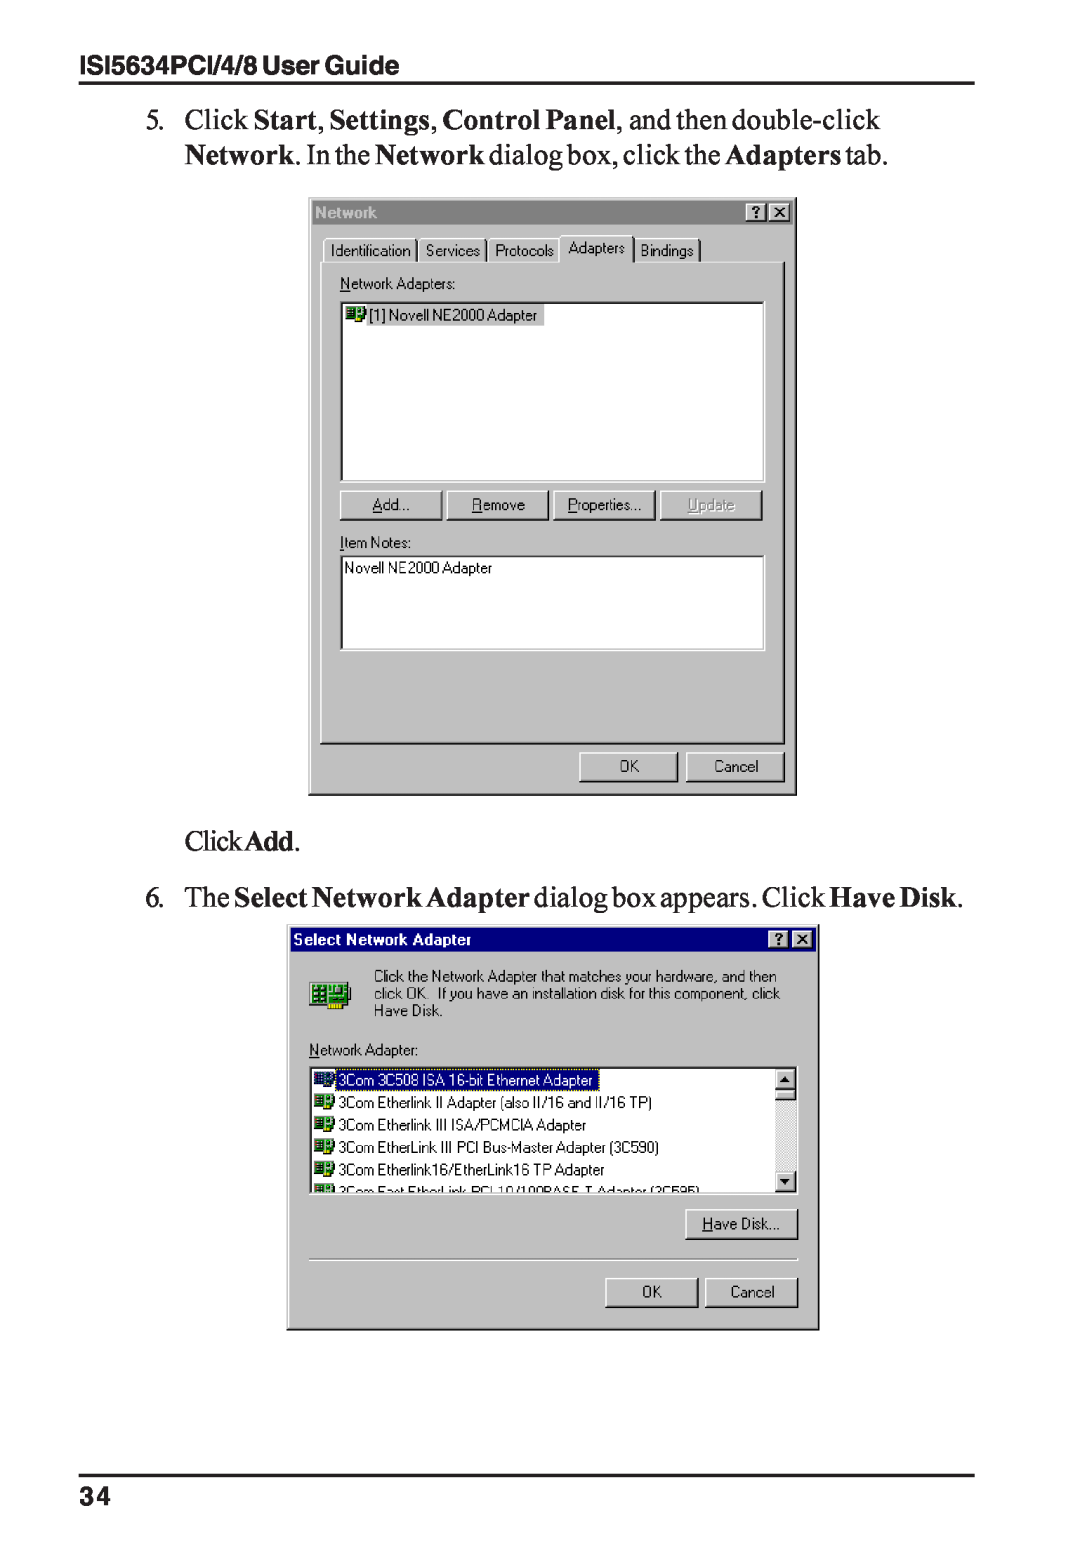 Multi-Tech Systems ISI5634PCI/4/8 manual The Select Network Adapter dialog box appears. Click Have Disk, ClickAdd 